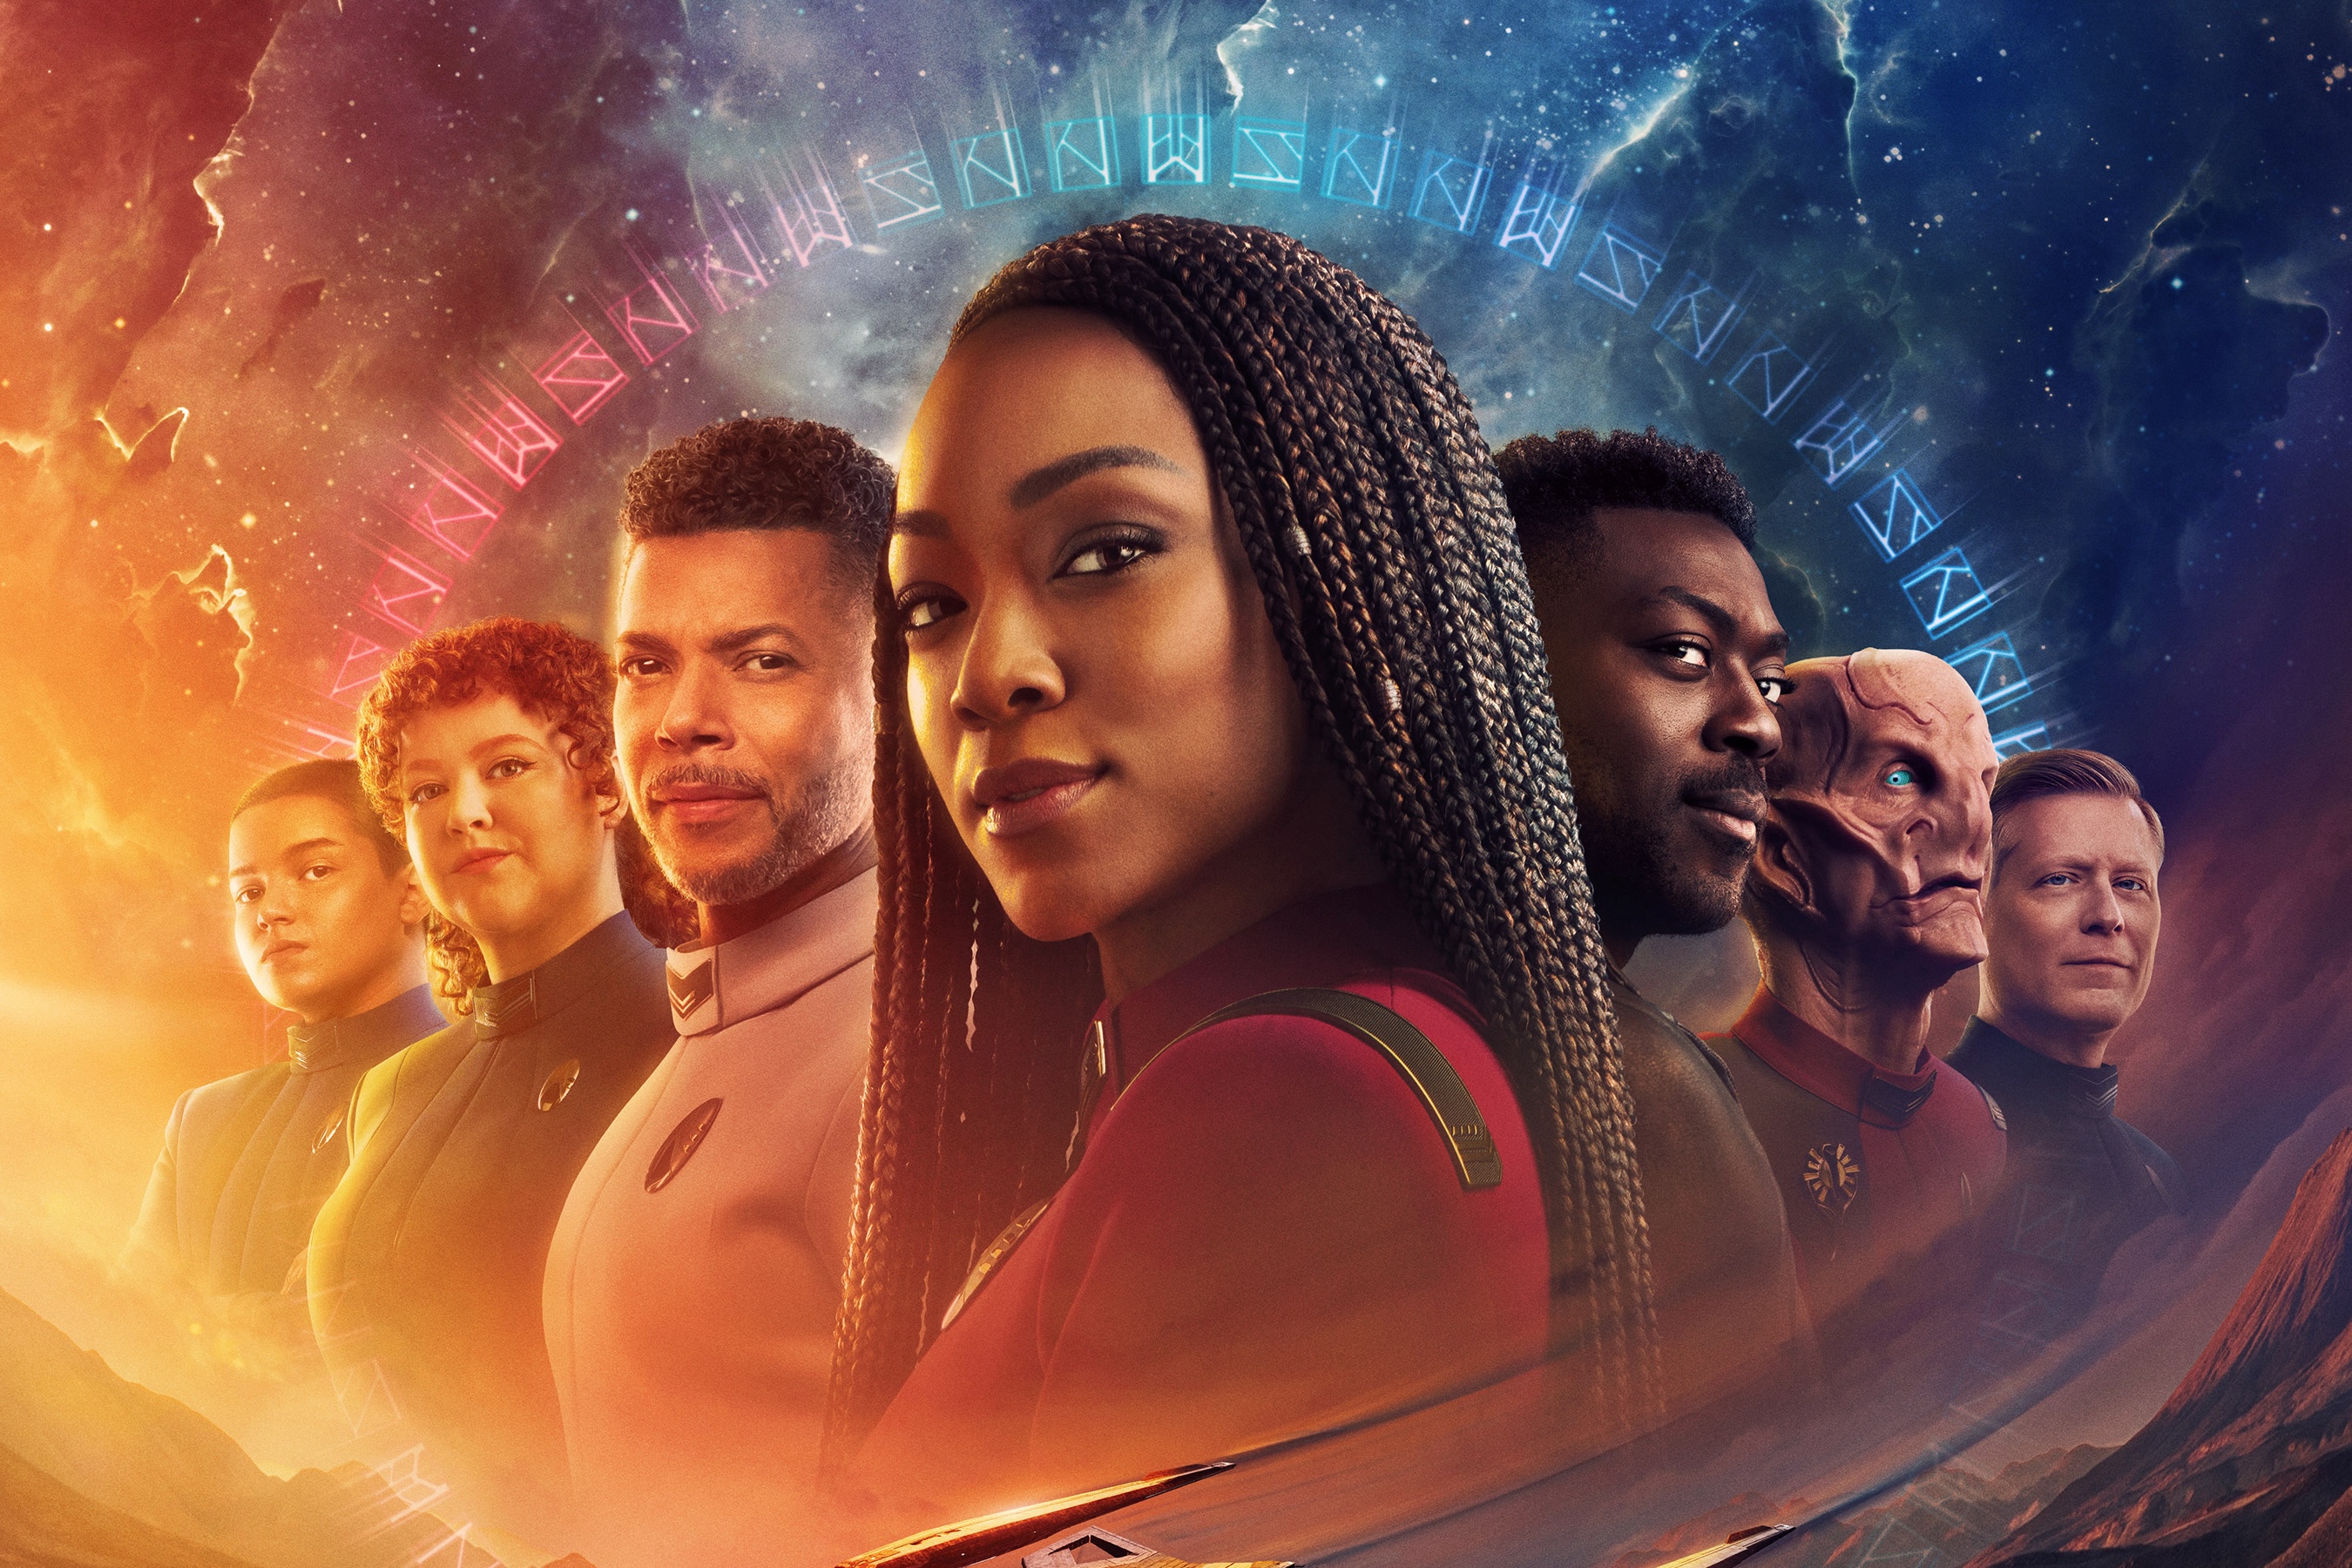 Promotional art for Star Trek: Discovery season 5, featuring a cast lineup surrounded by alien runes. LtR: Blu Del Barrio as Adira, Mary Wiseman as Tilly, Wilson Cruz as Culber, Sonequa Martin-Green as Burnham, David Ajala as Book, Doug Jones as Saru and Anthony Rapp as Stamets.